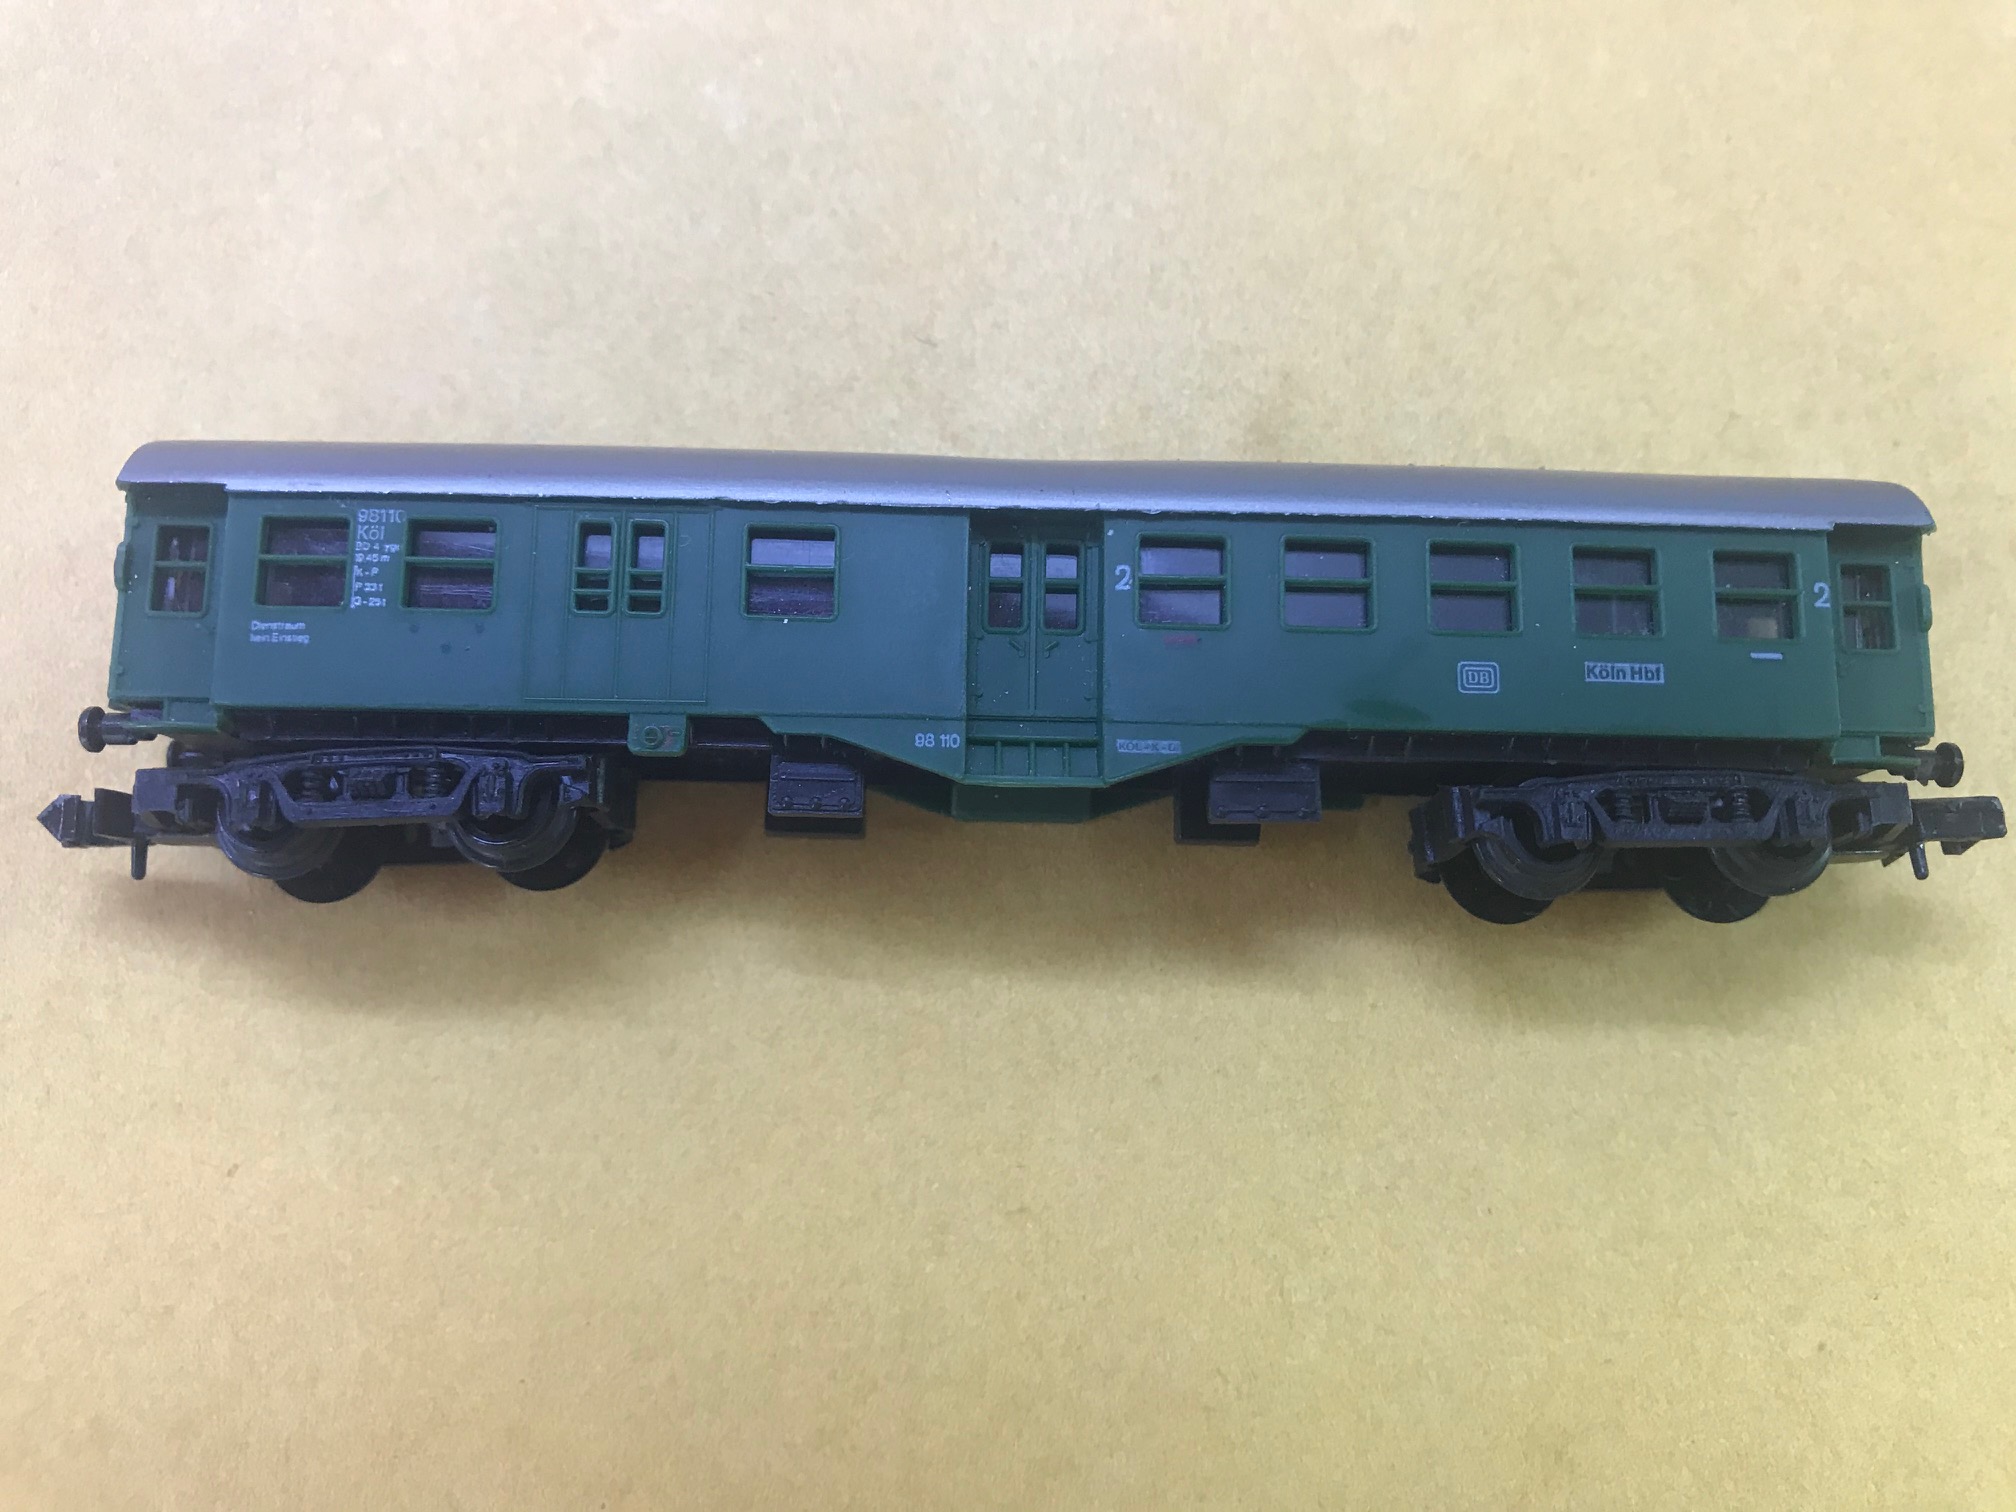 Preowned N Scale Lima Europa Series Passenger Cars